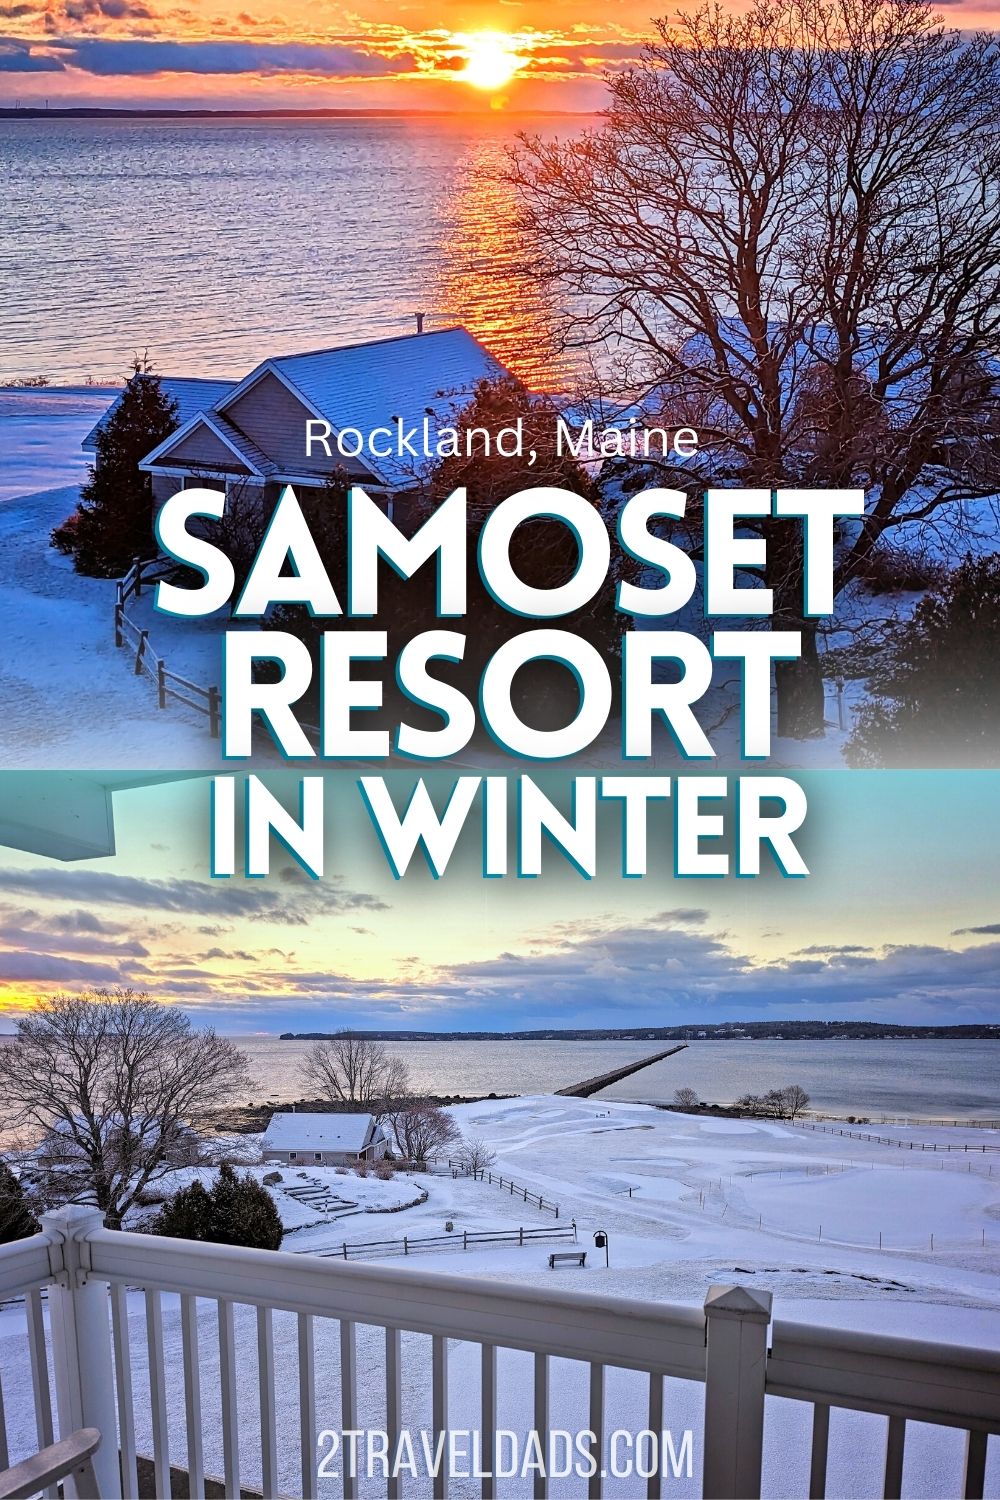 The Samoset Resort in winter is one of the best Maine experiences you can have in the cold. From beautiful accommodations to easy access to the Rockland Breakwater Lighthouse, this resort hotel is a unique and wonderful choice in MidCoast Maine.